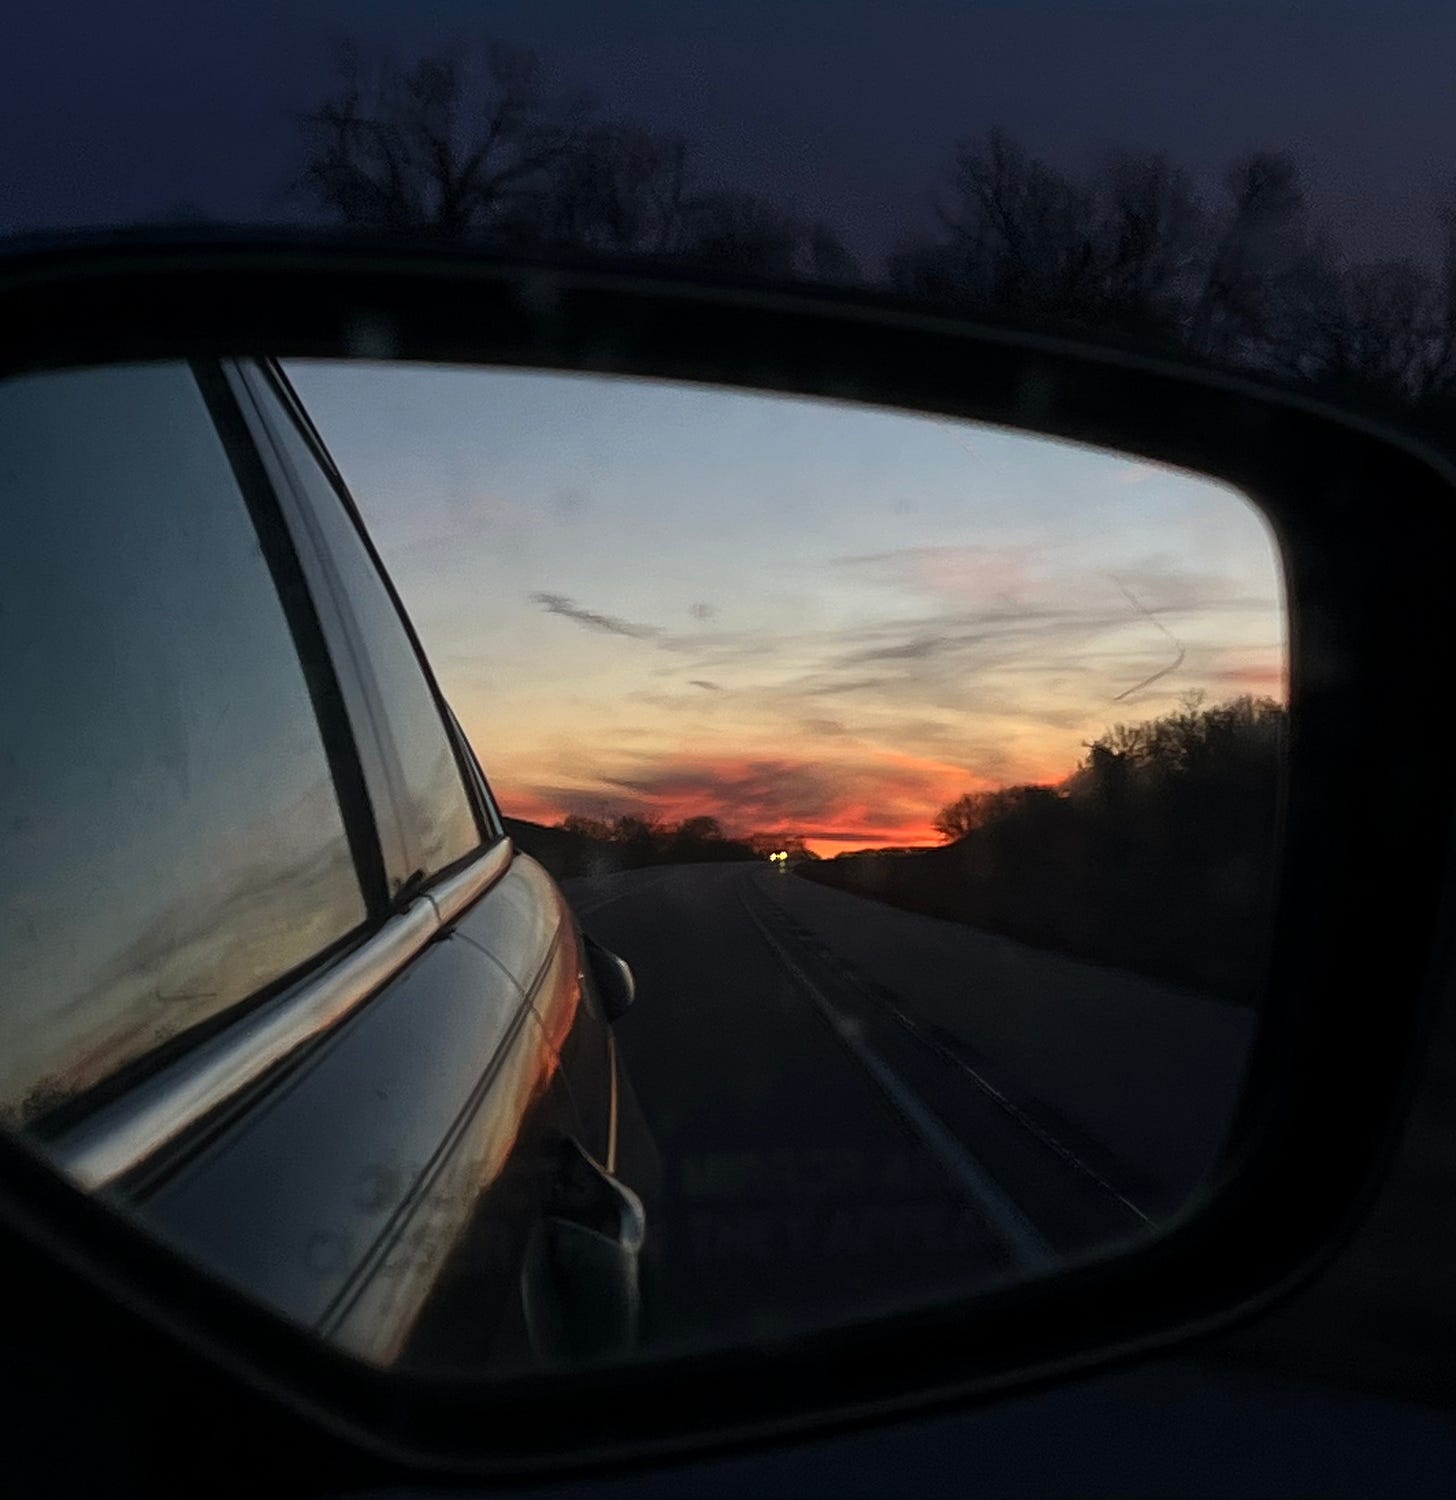 In a side mirror, the edge of the car is visible, and beyond is the road and sunset. Near the horizon, it's bright orange with clouds in front.